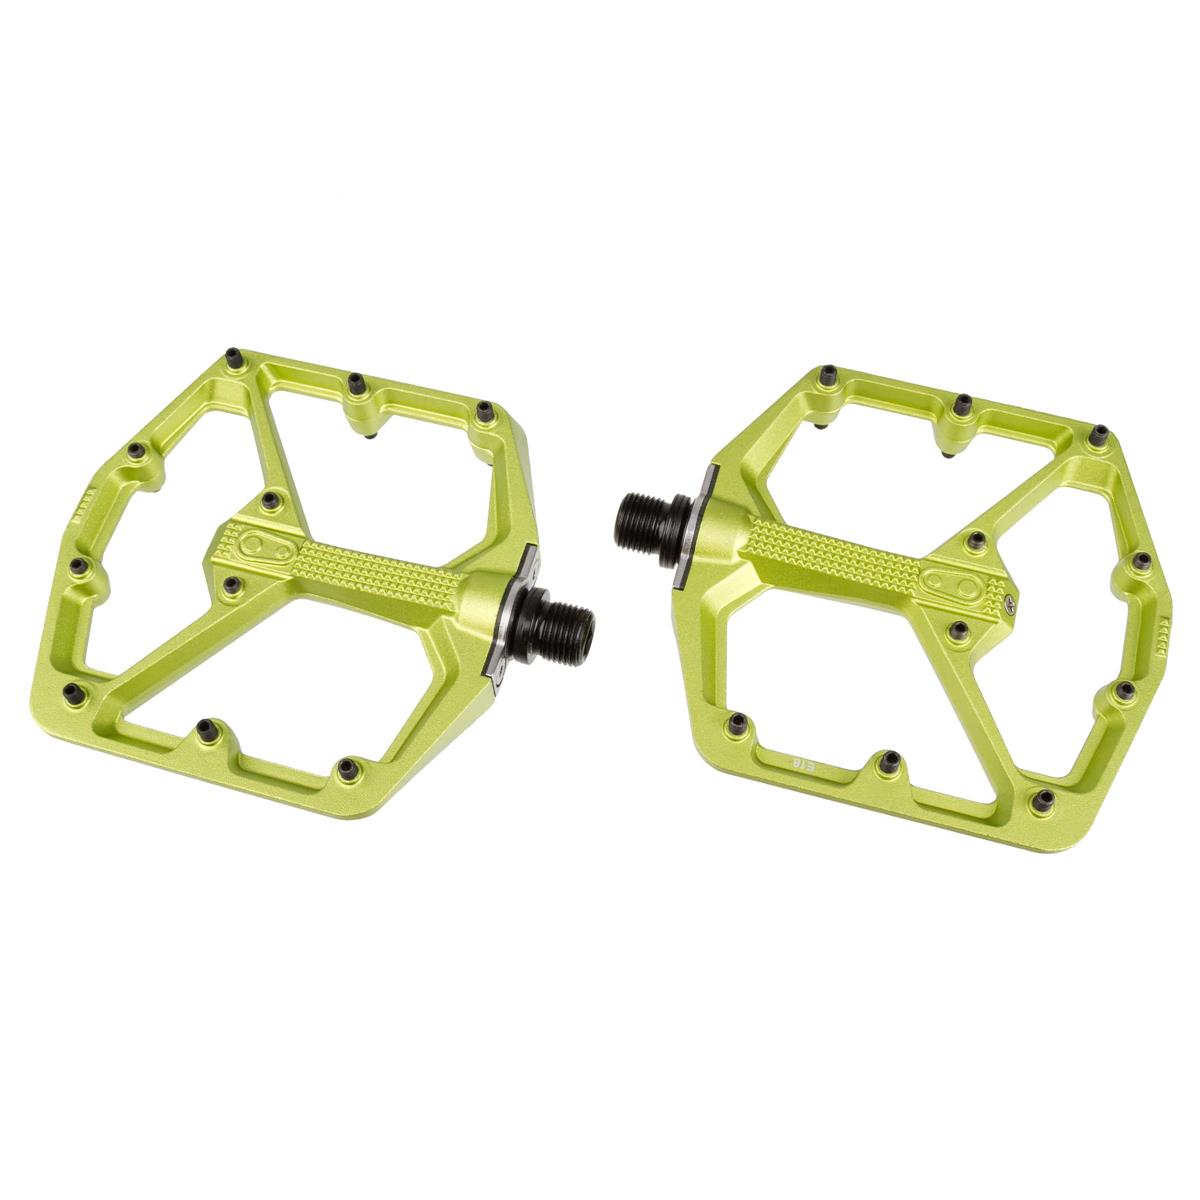 Crankbrothers Pedali Stamp 7 Limited Edition, Green, Large